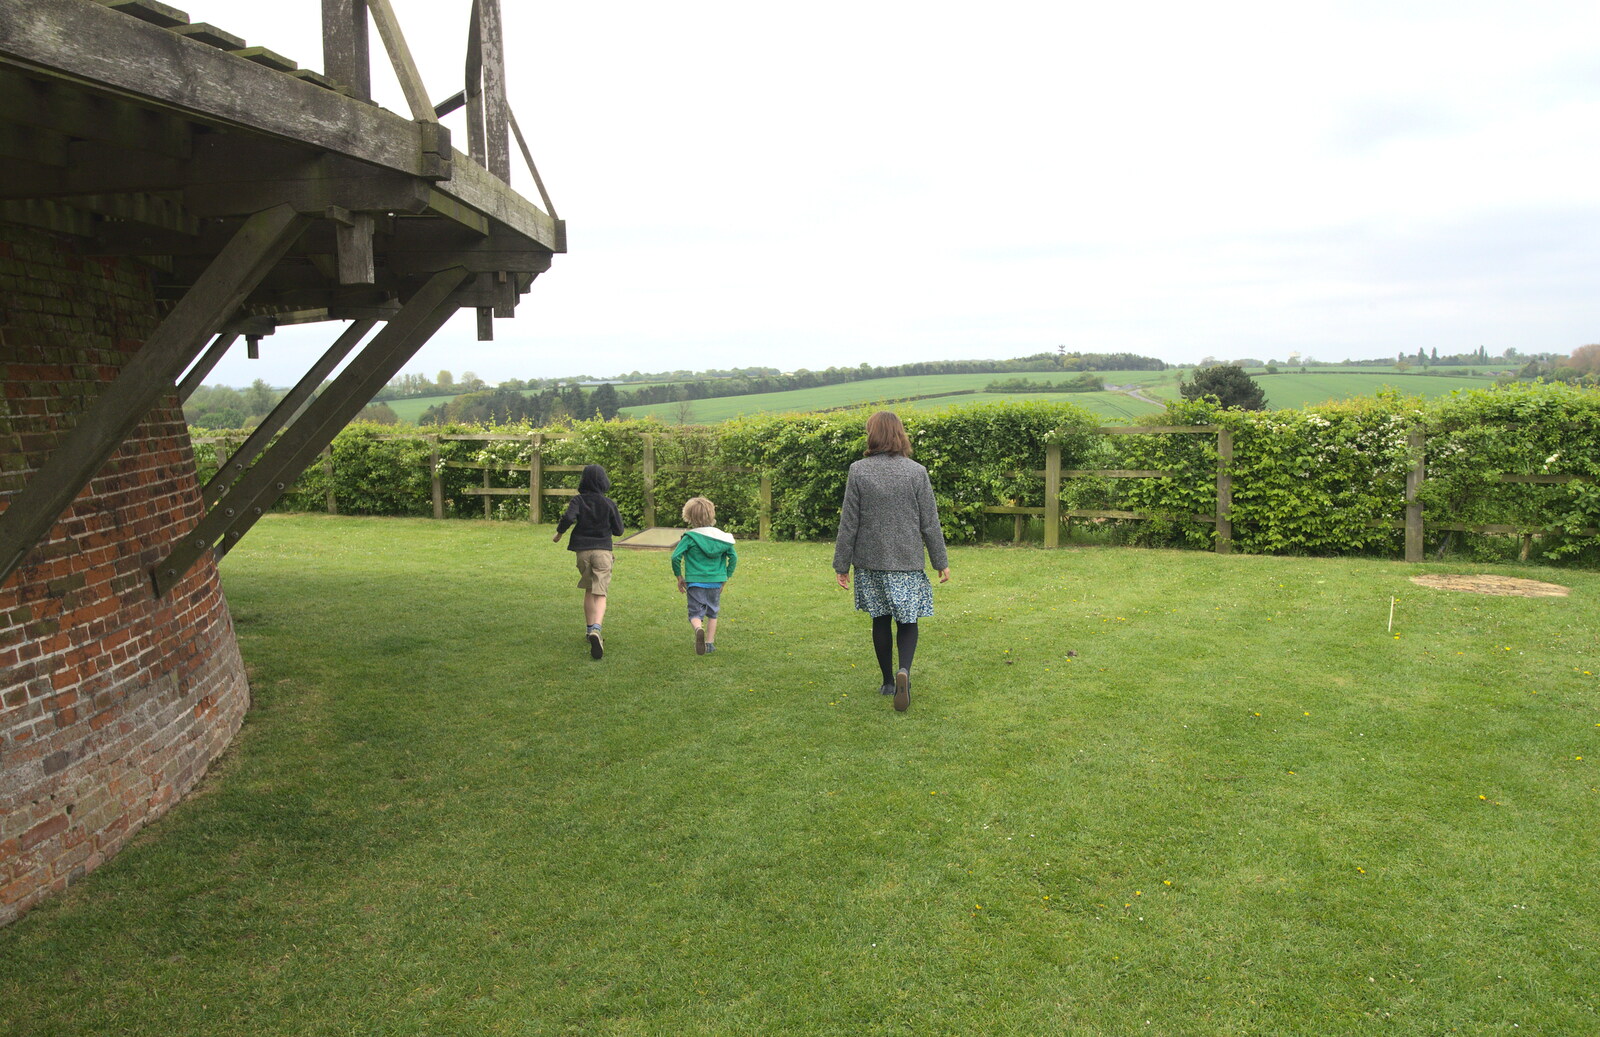 The boys run around the windmill from A Postcard From Thaxted, Essex - 7th May 2017